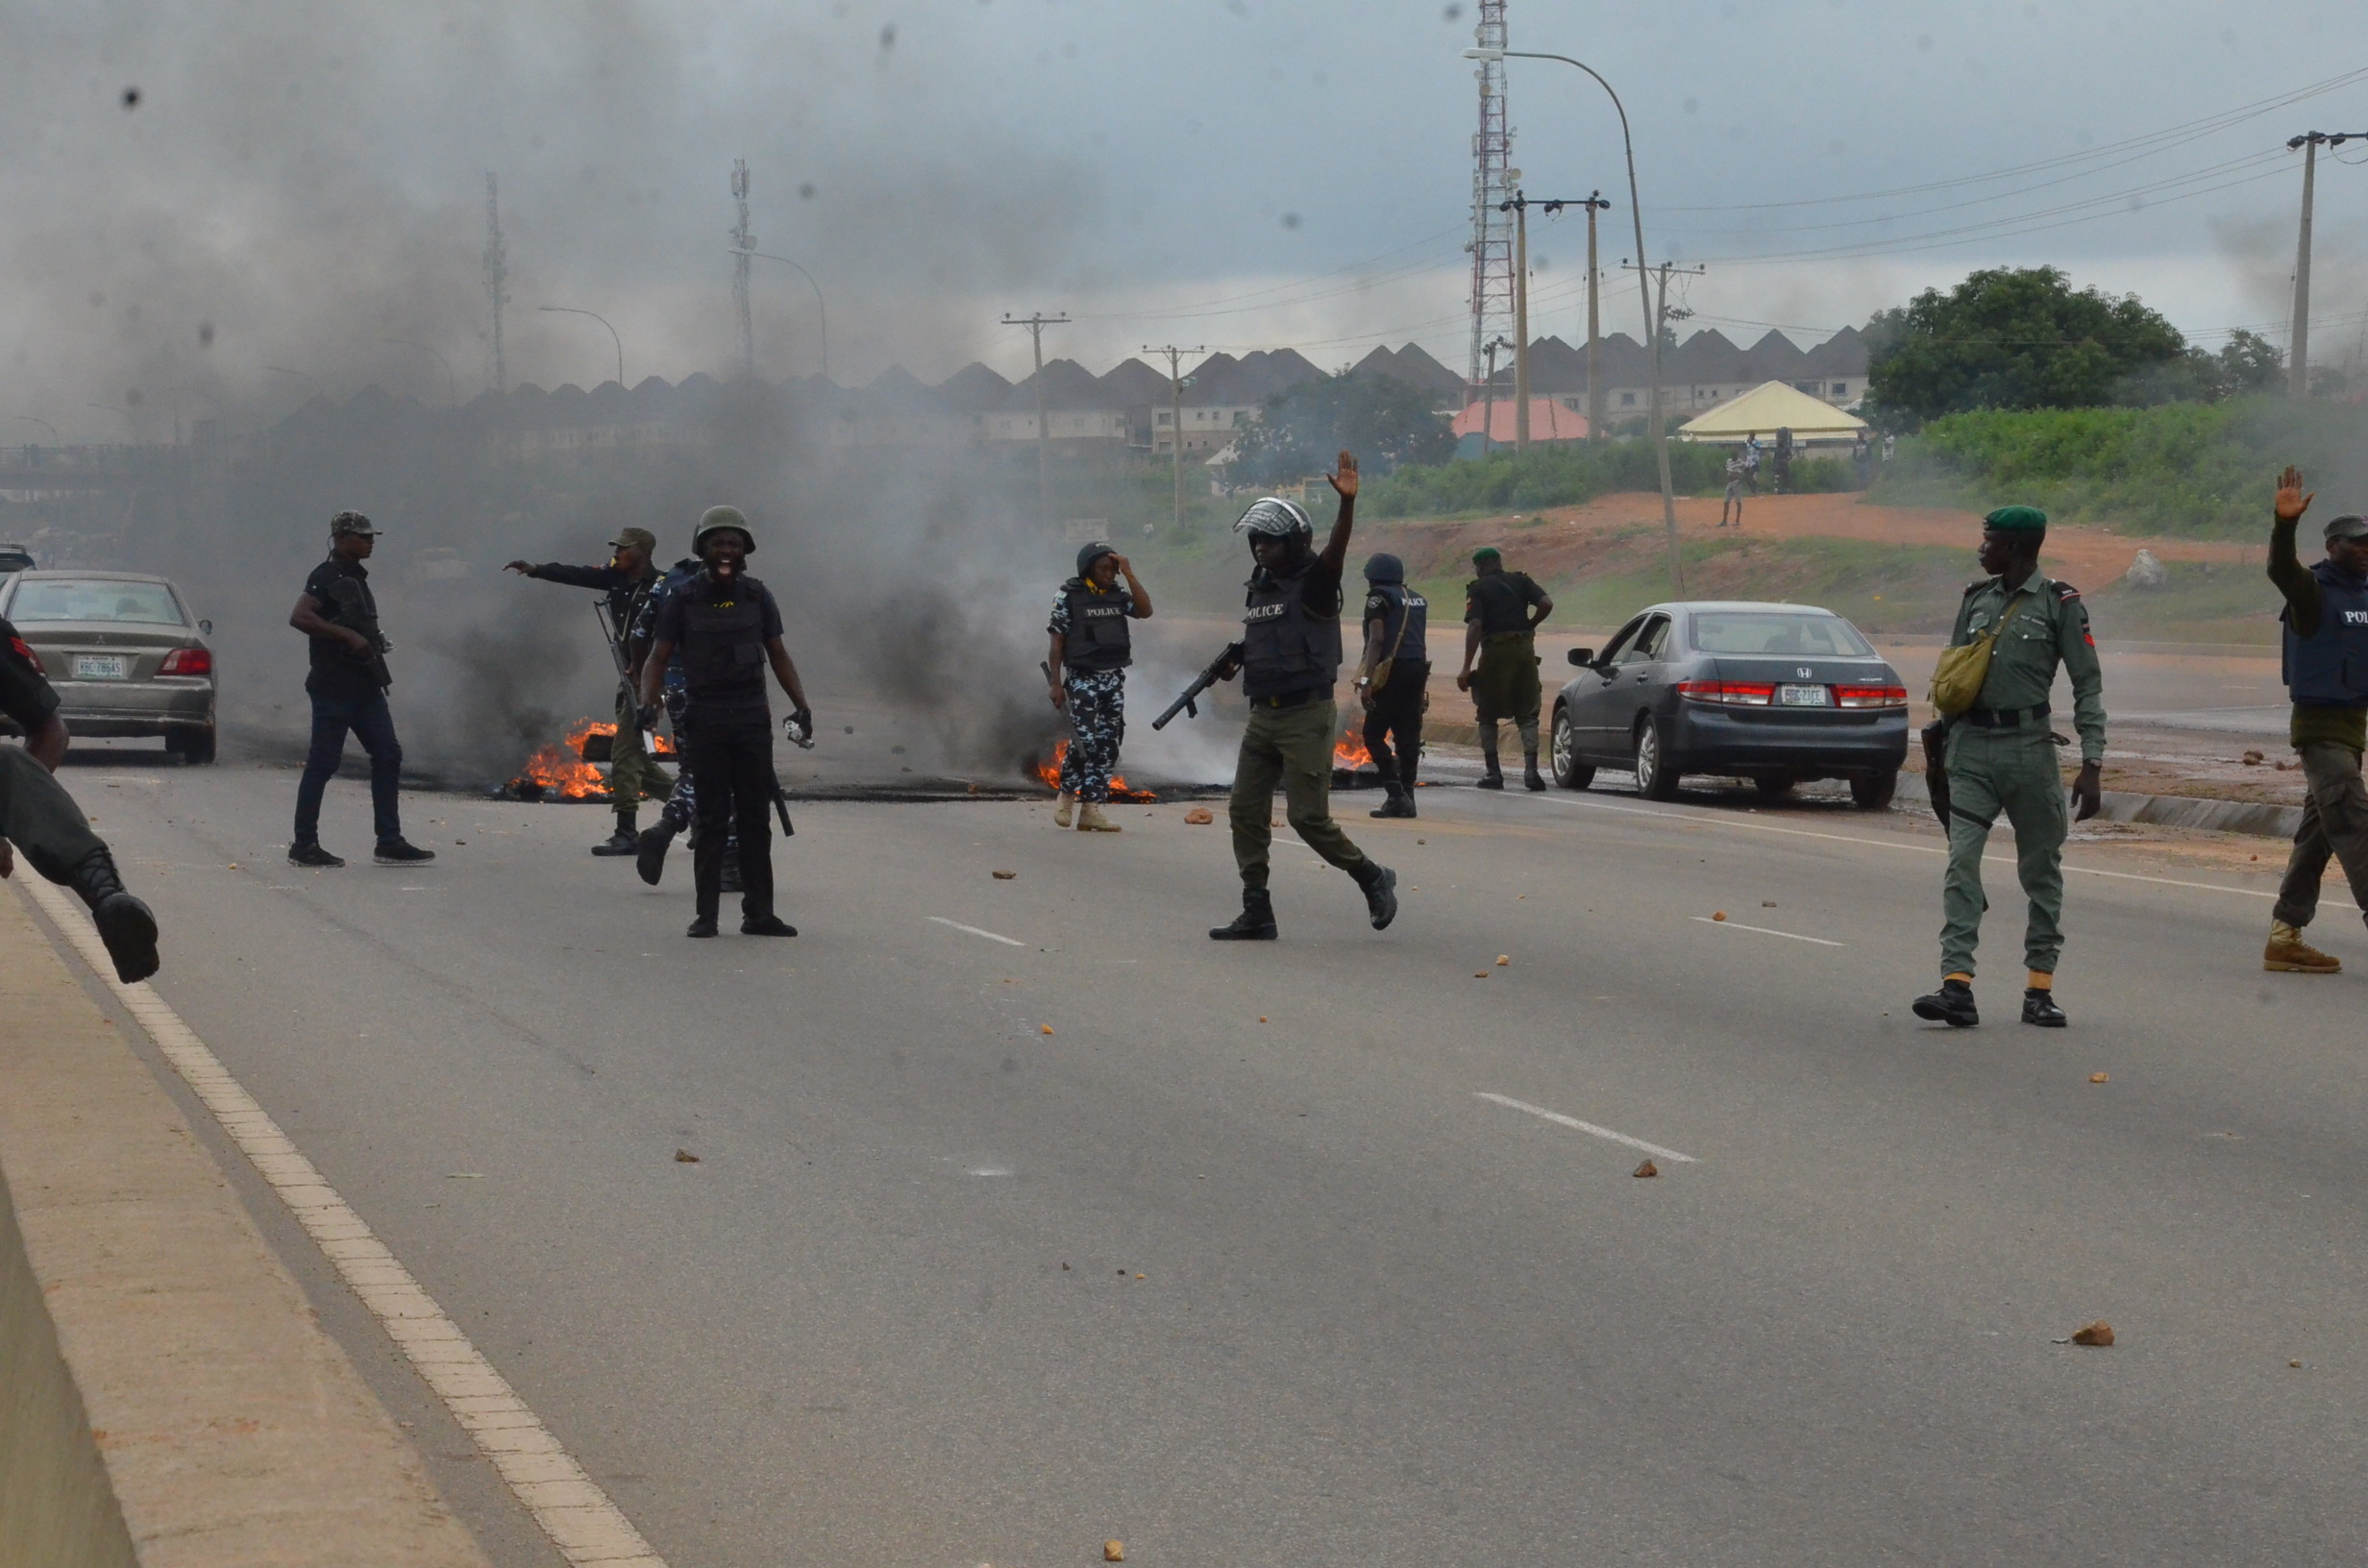 Nigerian police officers clear a barricaded road during a protest in Abuja, on Sept. 4, 2019. South African telecommunications giant MTN on Wednesday ordered the closure of all its offices and service outlets in Nigeria amid rising tension to unleash mayhem on them in reprisal of xenophobic attacks in the rainbow nation. / Xinhua